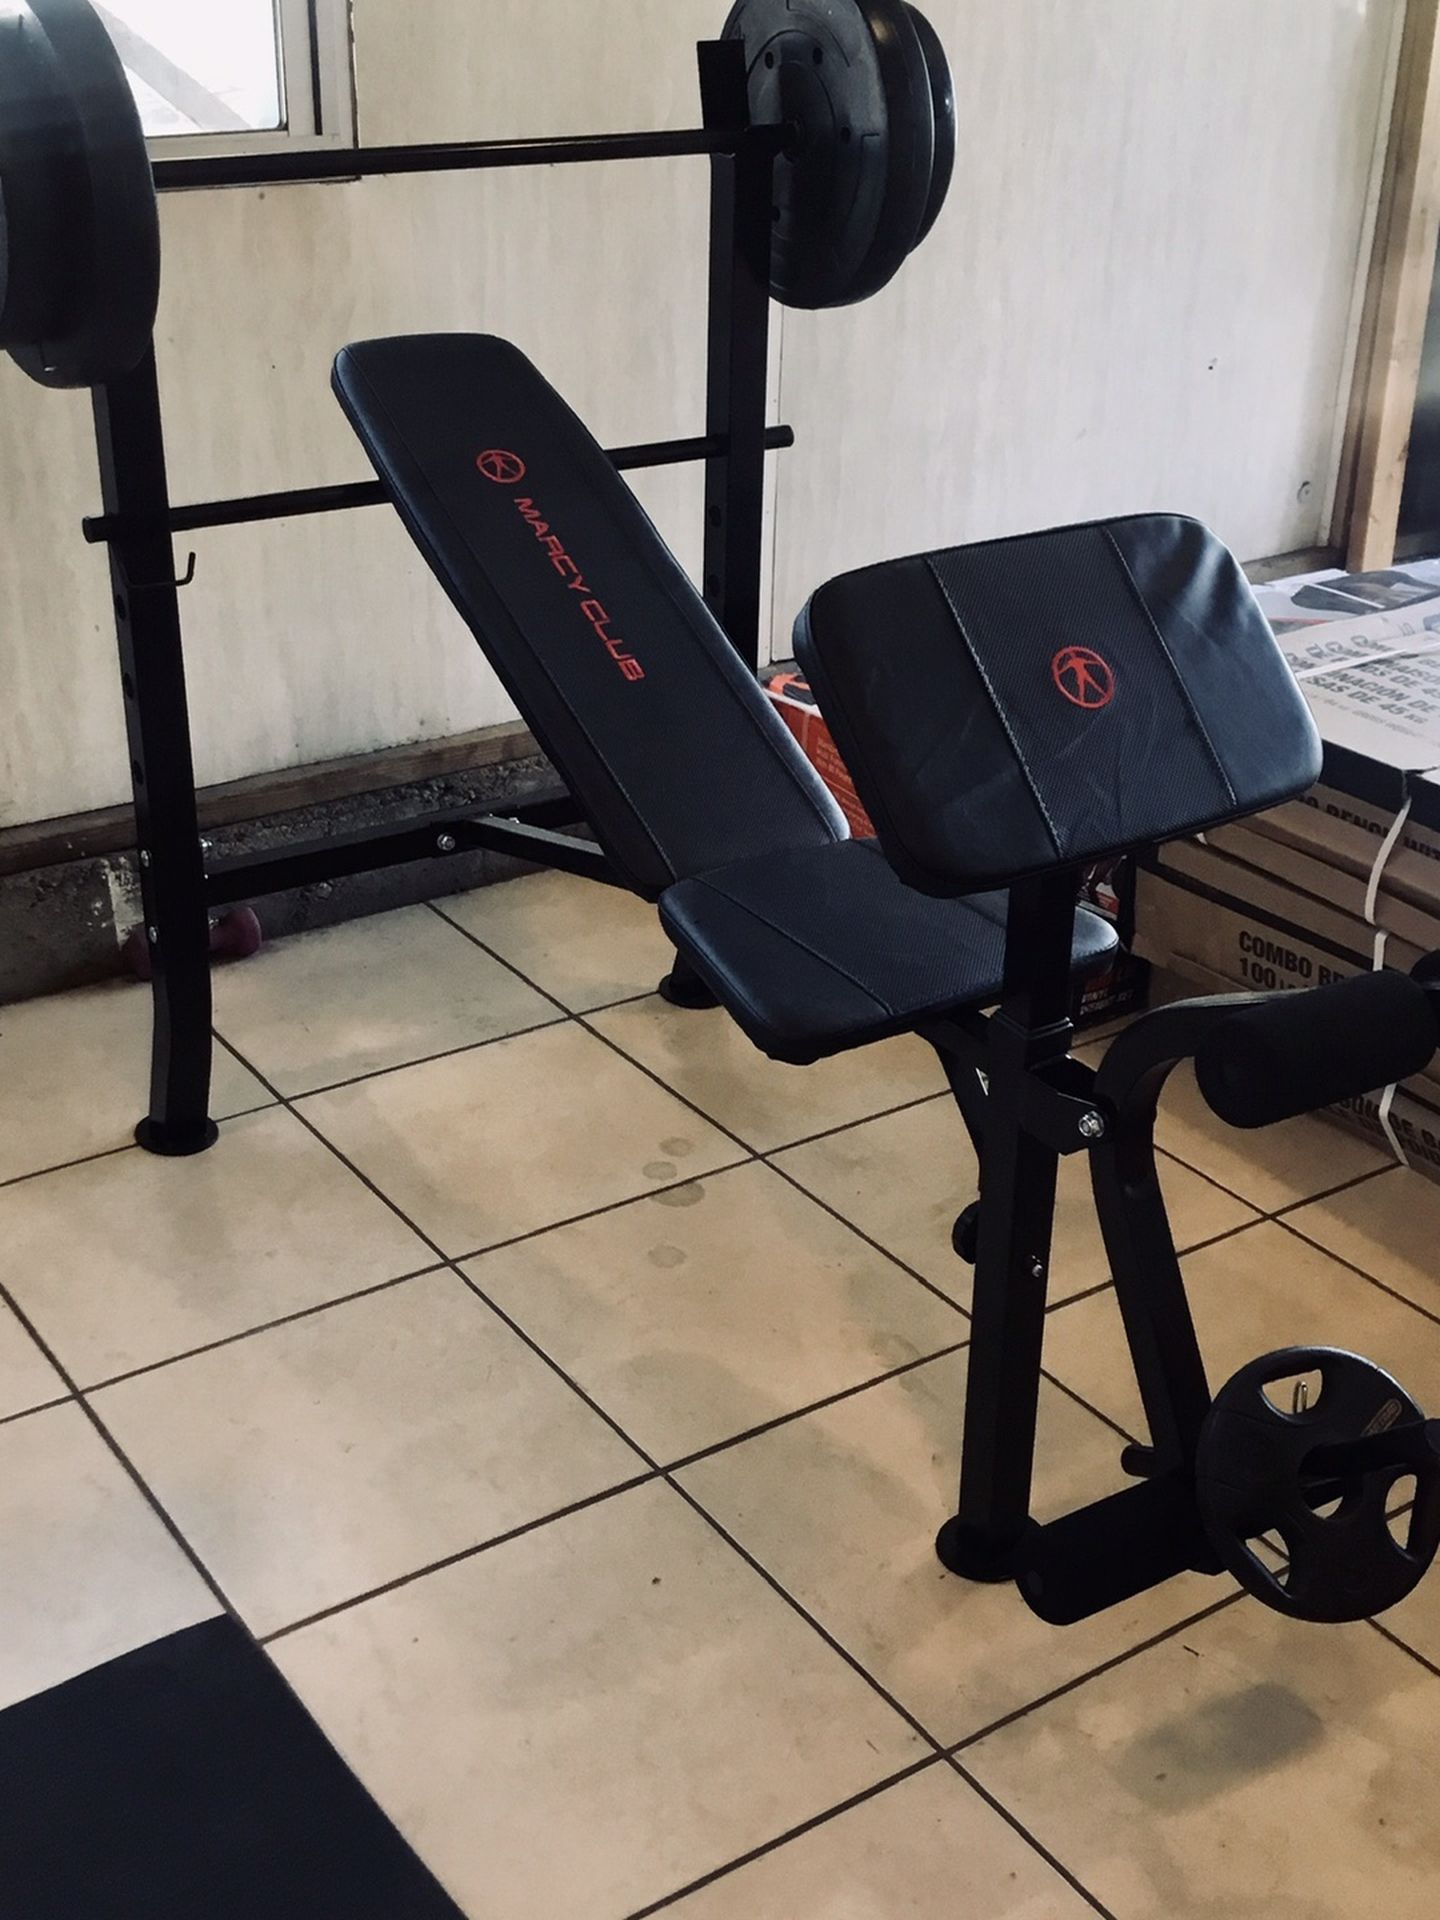 Adjustable Bench Press, Barbell, Leg Extension, Preacher Curl, 100lbs Of Weights Included